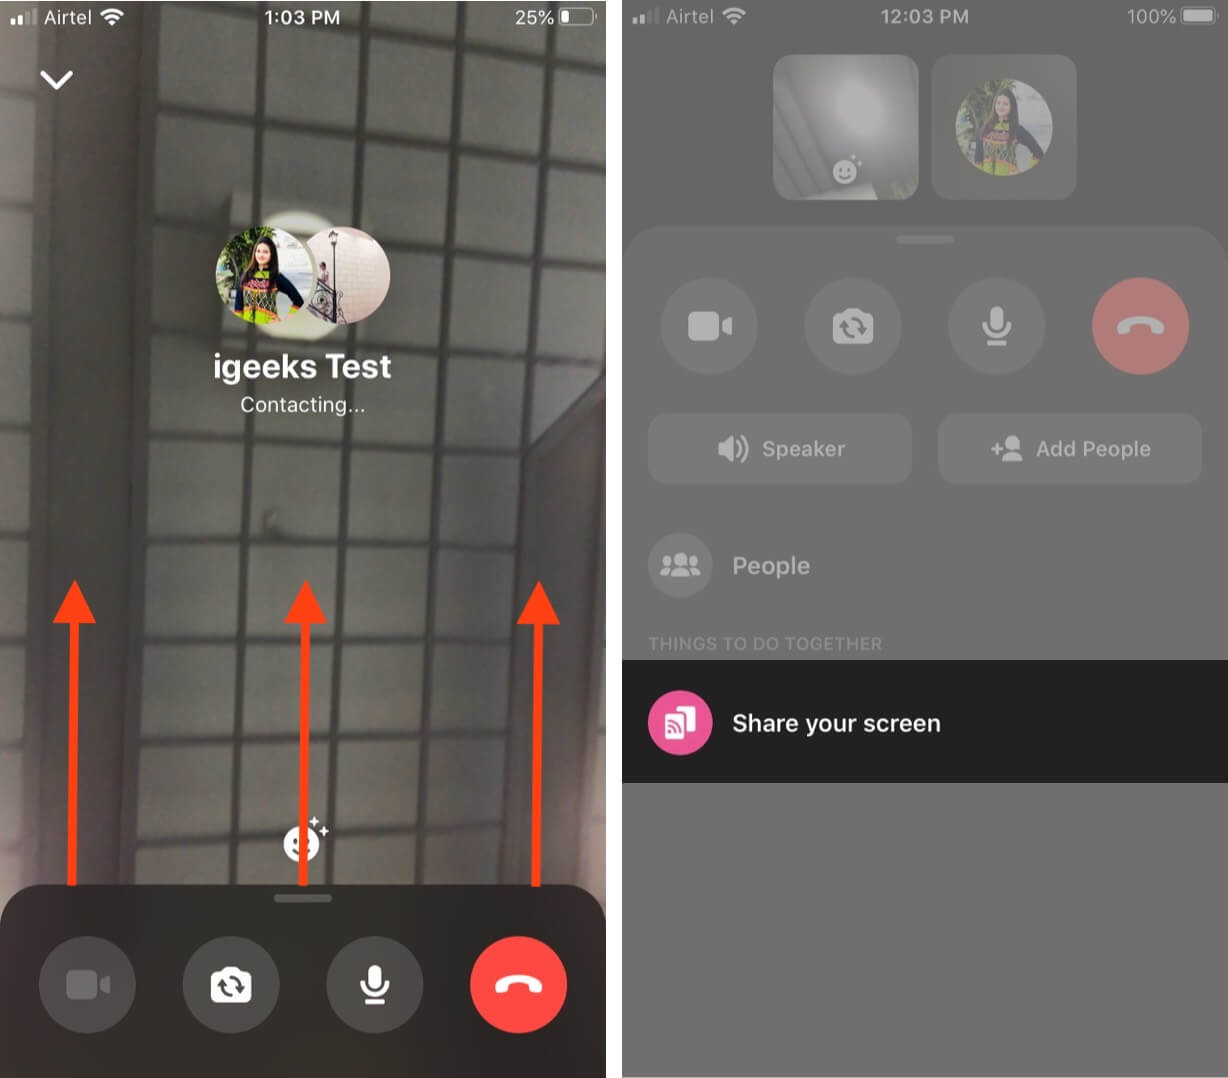 swipe up and tap on share your screen in group video chat on messenger